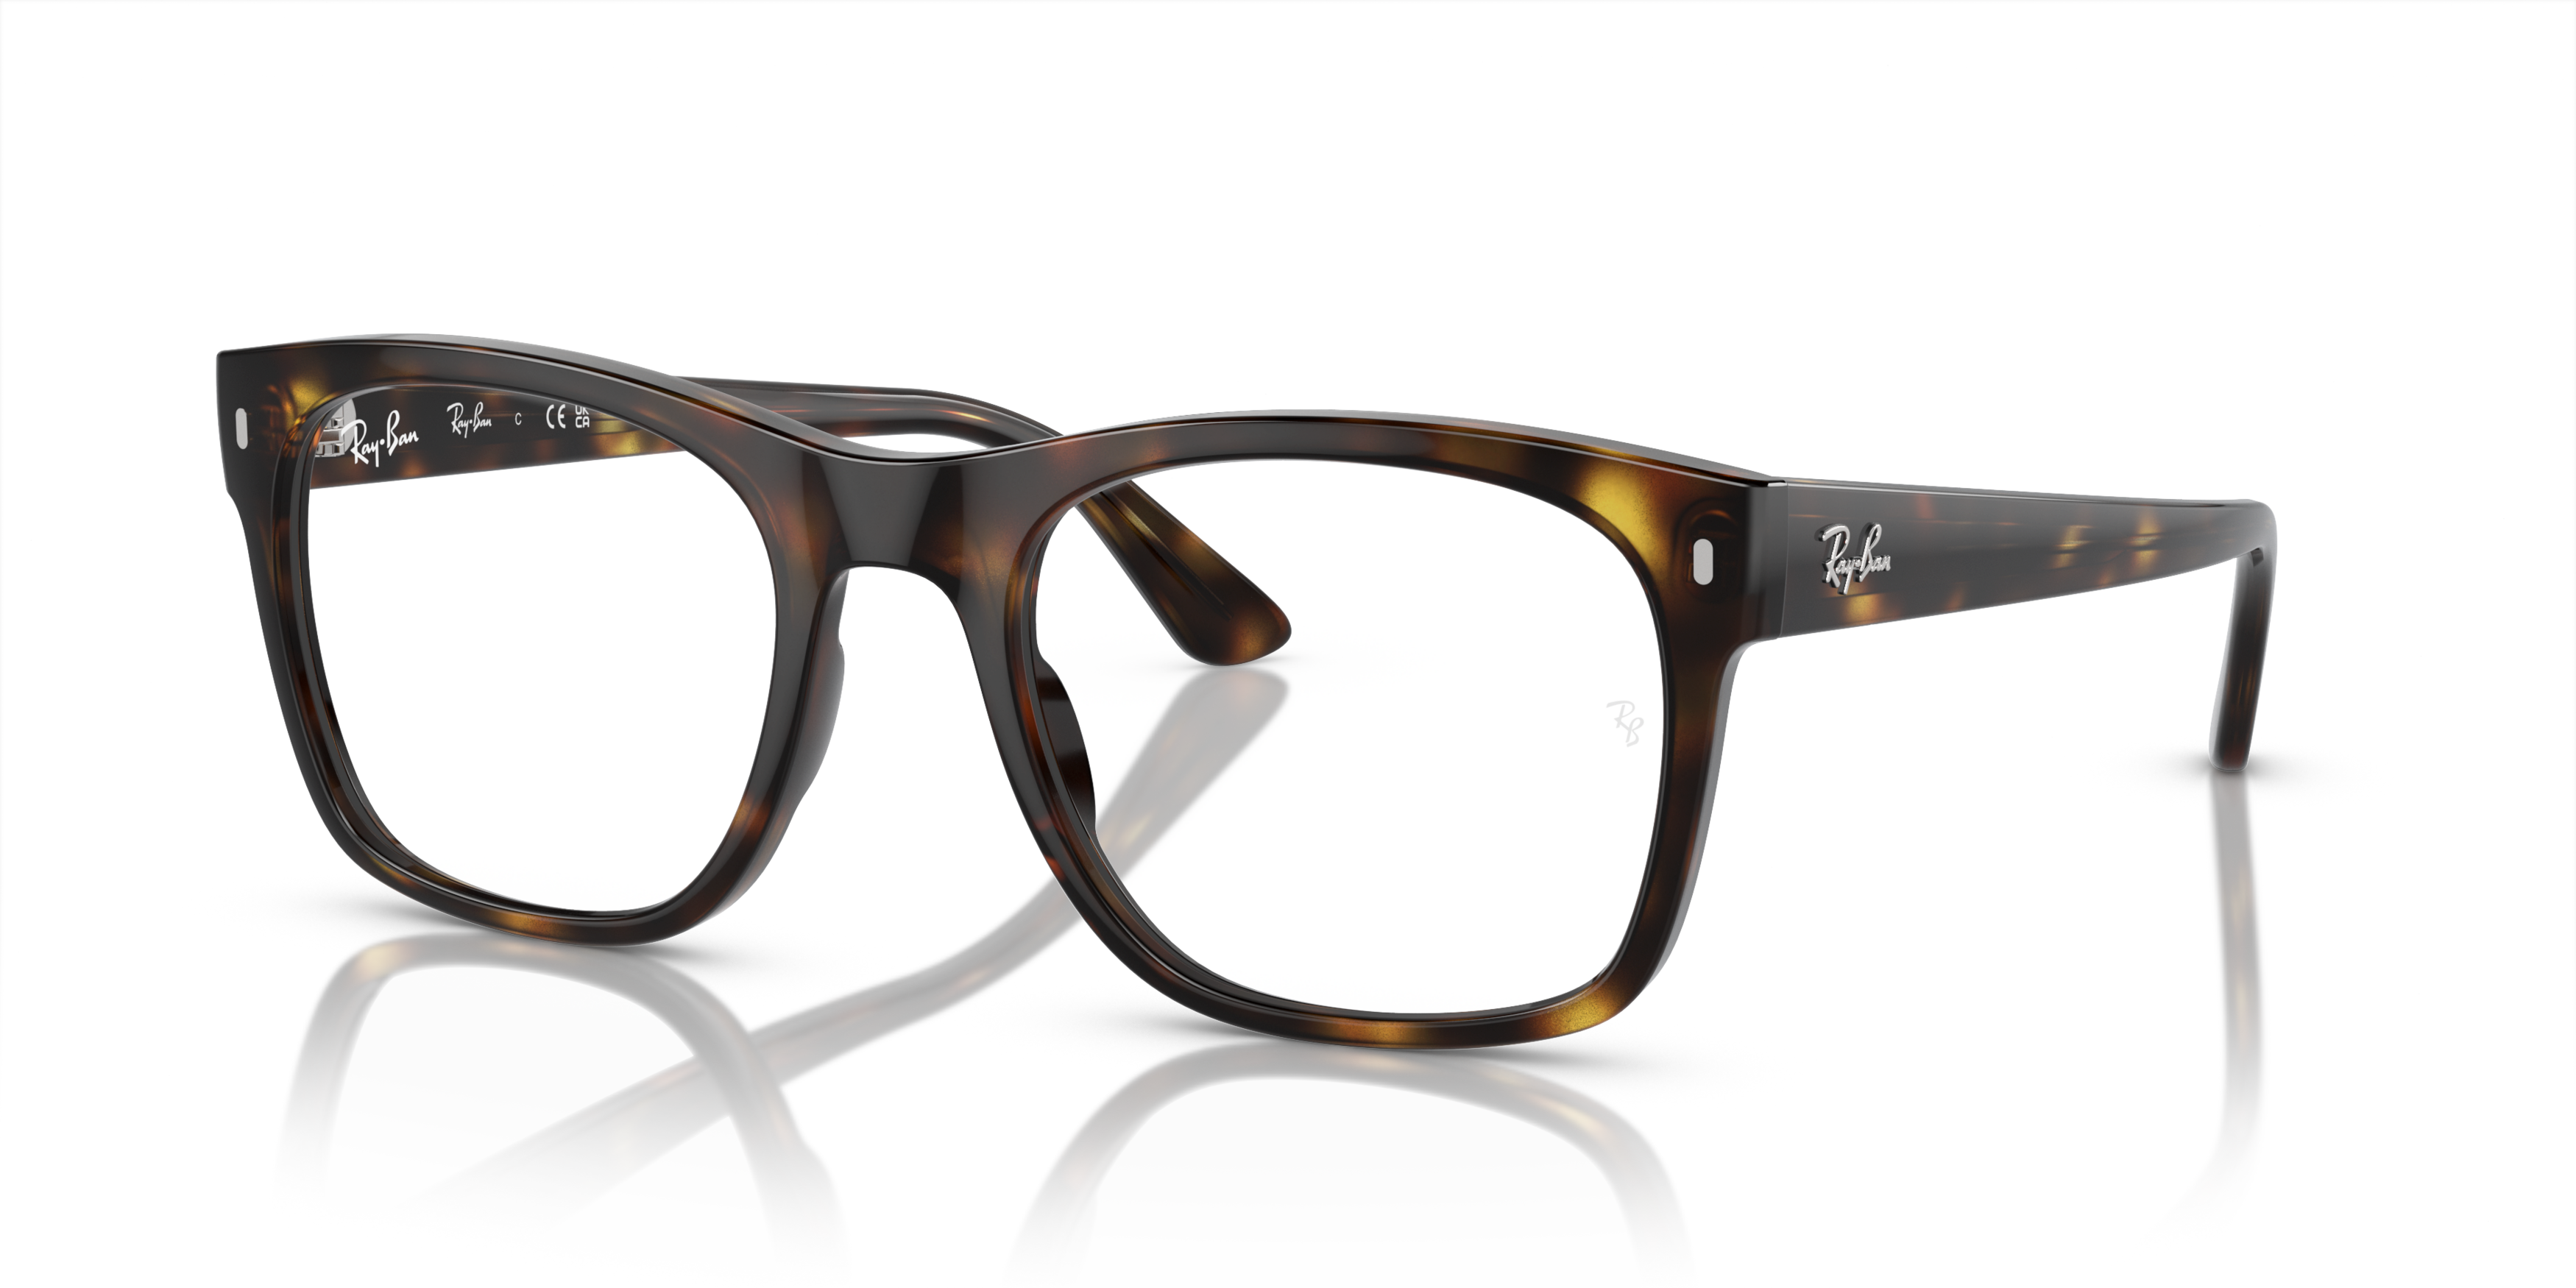 Angle_Left01 Ray-Ban RX 7228 Glasses Transparent / Tortoise Shell